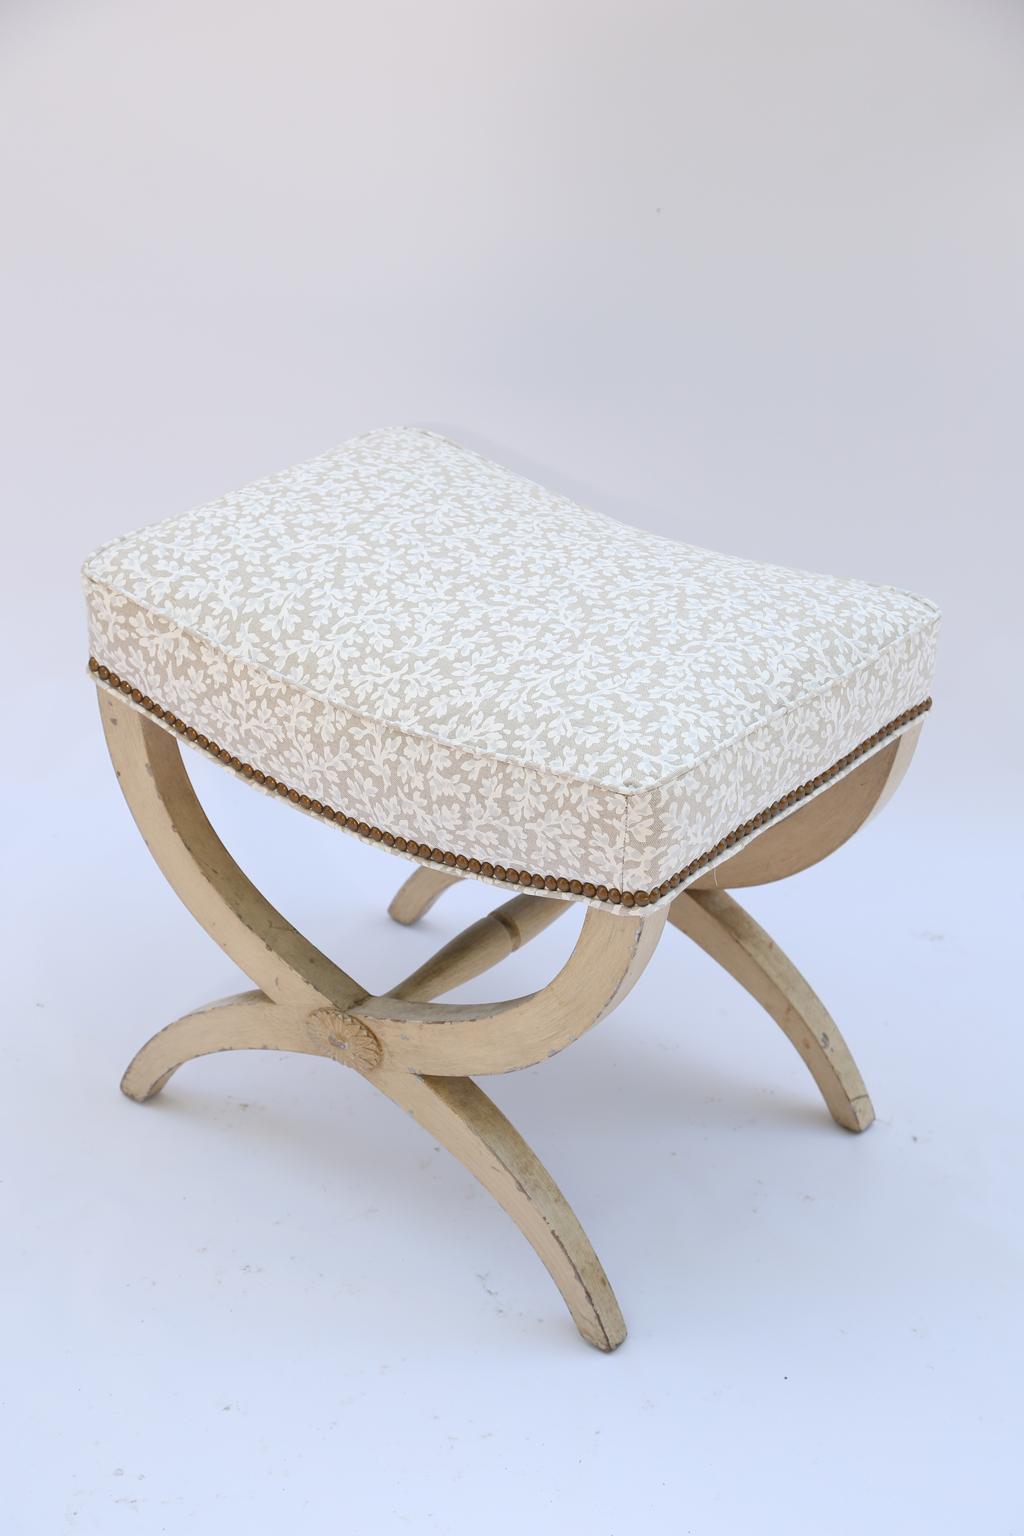 Stool, having a rectangular boxed seat, on painted base showing natural wear, its Curule form legs joined by turned stretcher, and rosette. Upholstered in vintage printed-linen, with nailheads.

Stock ID: D1758.